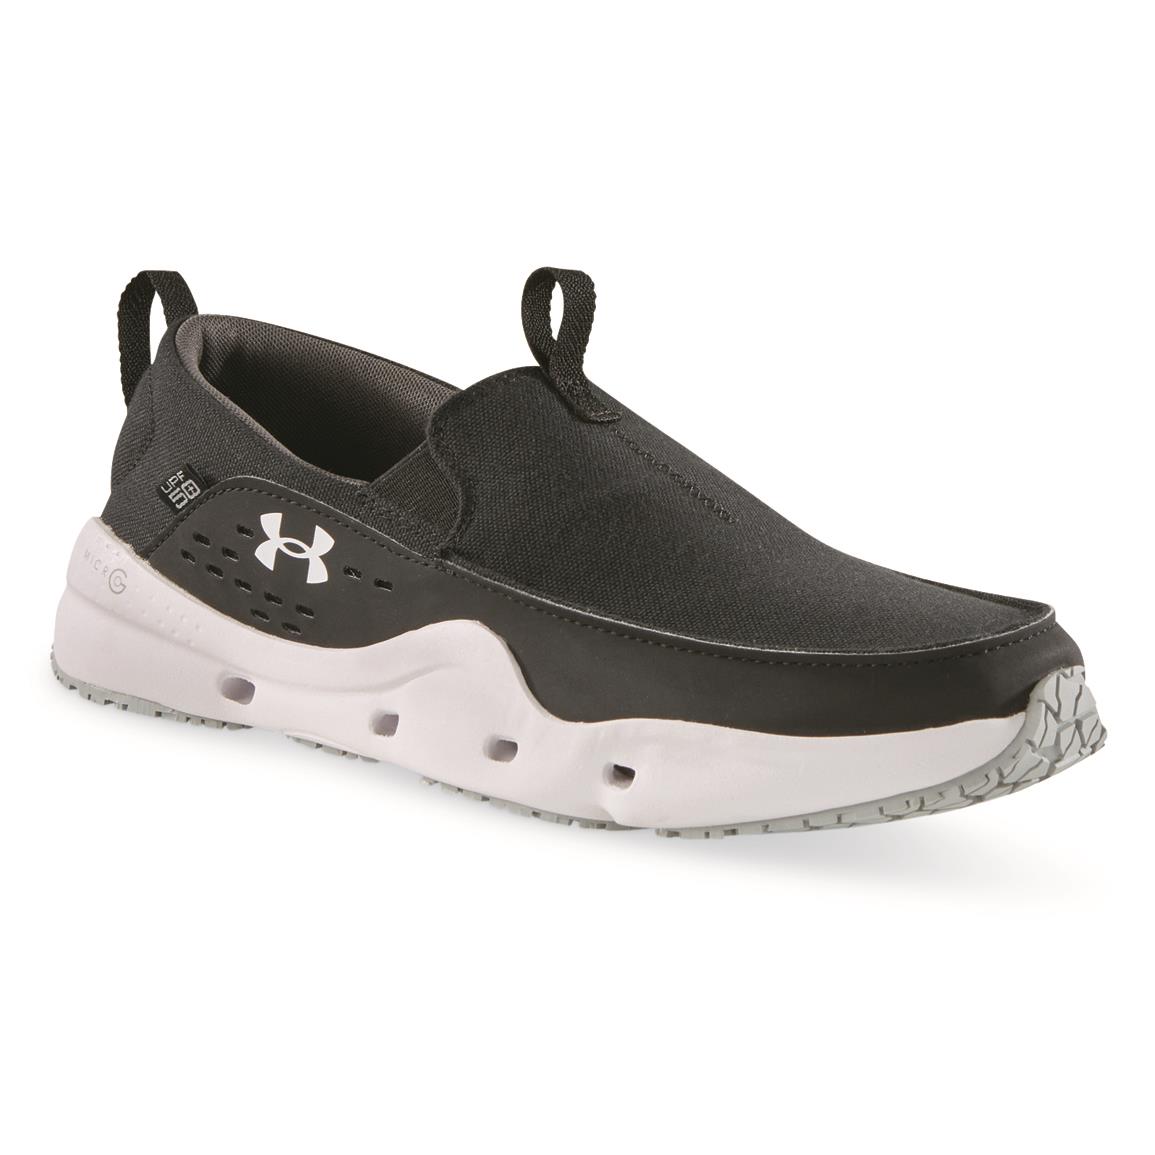 Under armour micro g Kilchis water/fishing shoes, Men's Fashion